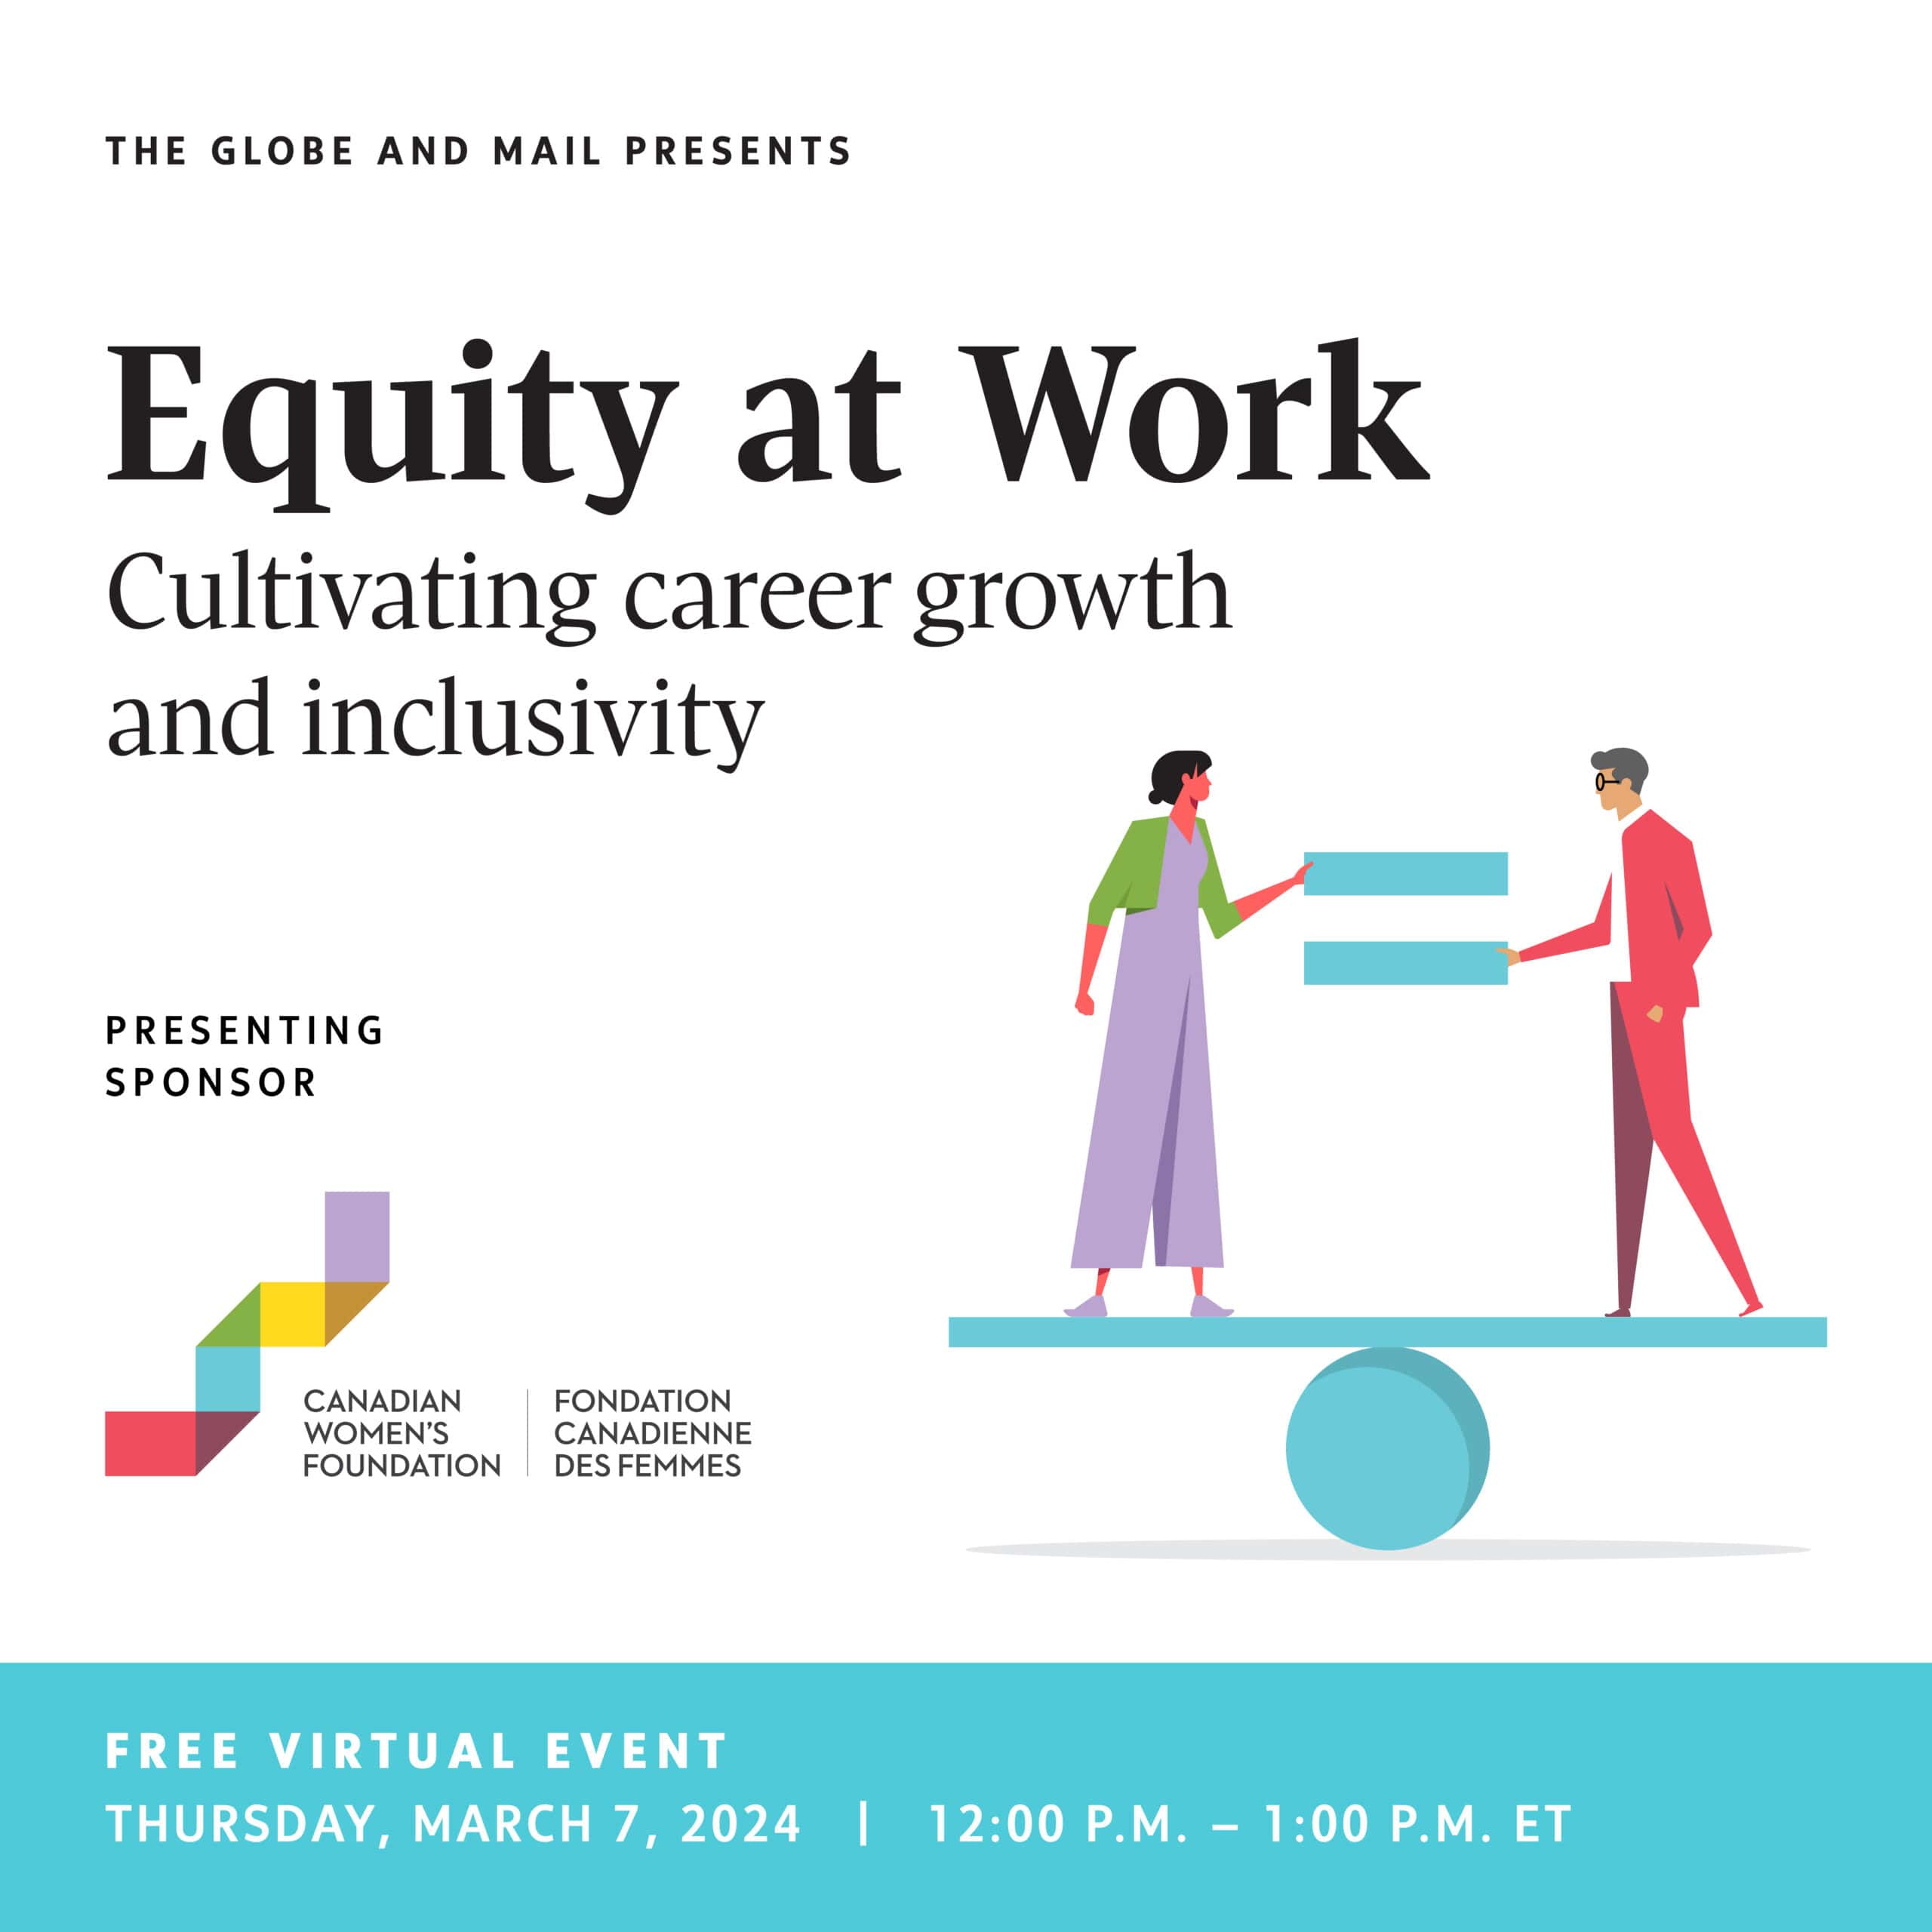 Promotional image of International Women's Day event called Equity at Work: Cultivating career growth and inclusivity on March 7, 2024 at 12-1p.m.ET